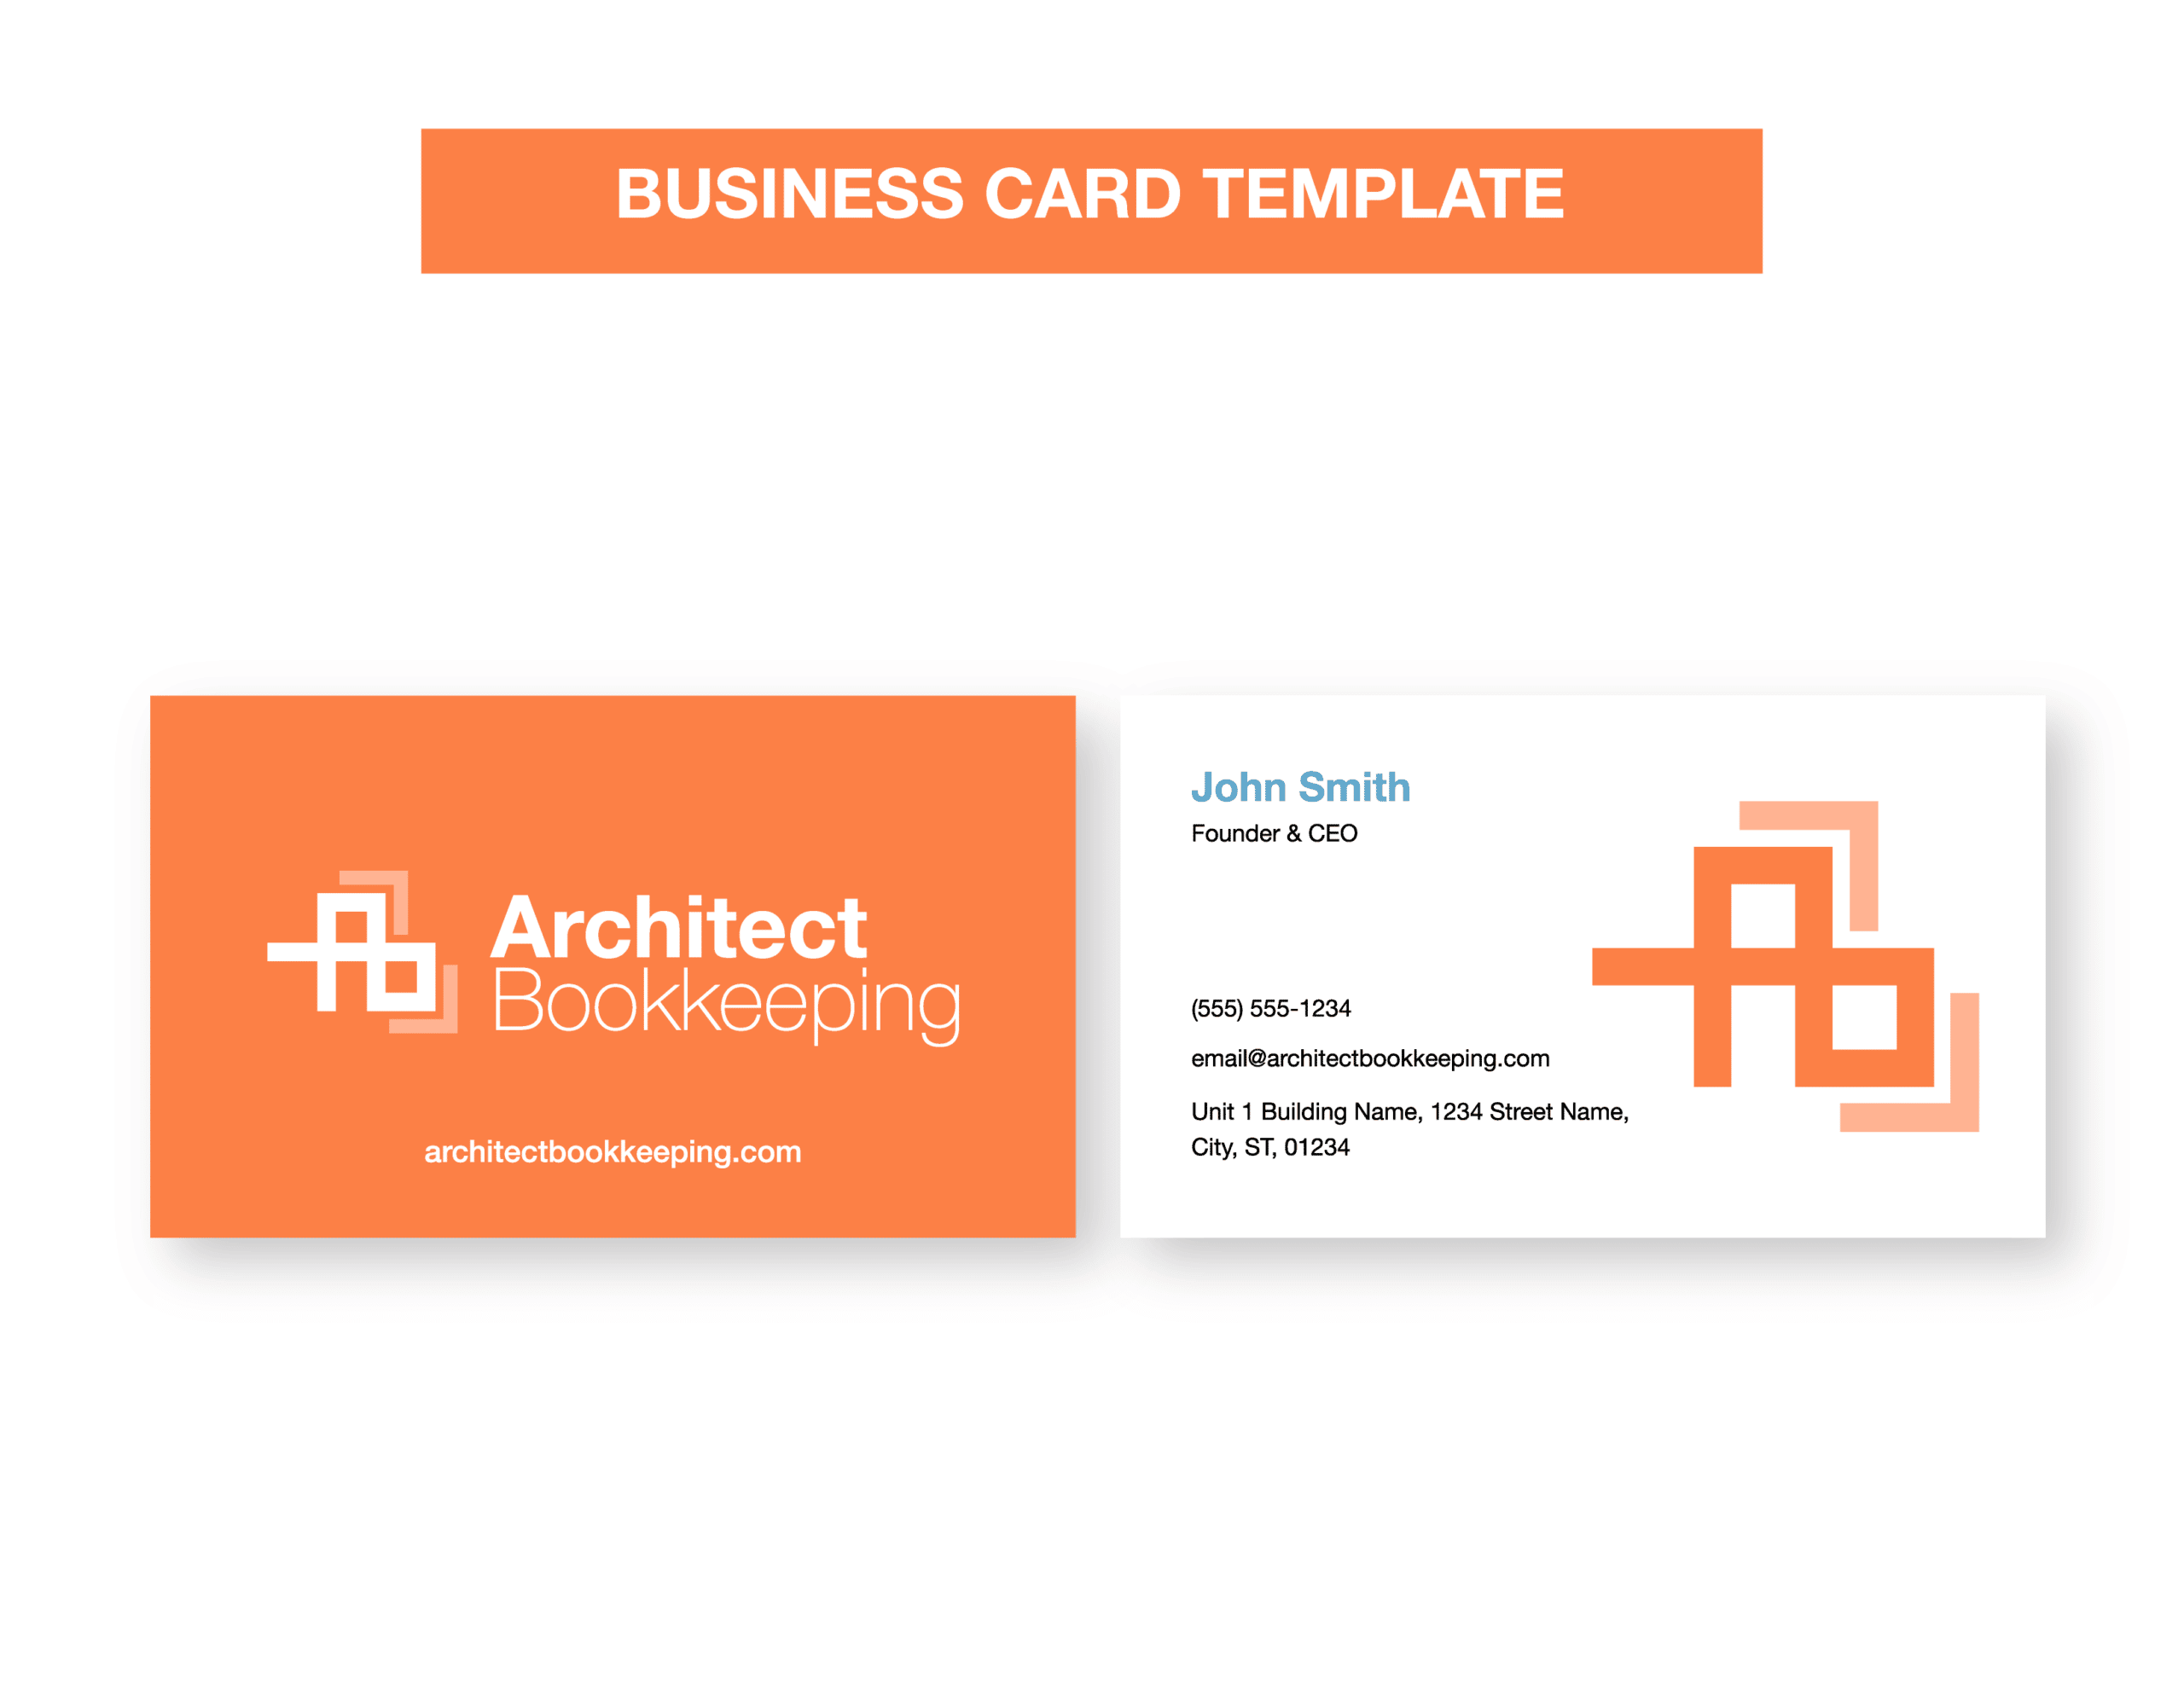 04ArchitectBookkeeping_Showcase_Business Card Template